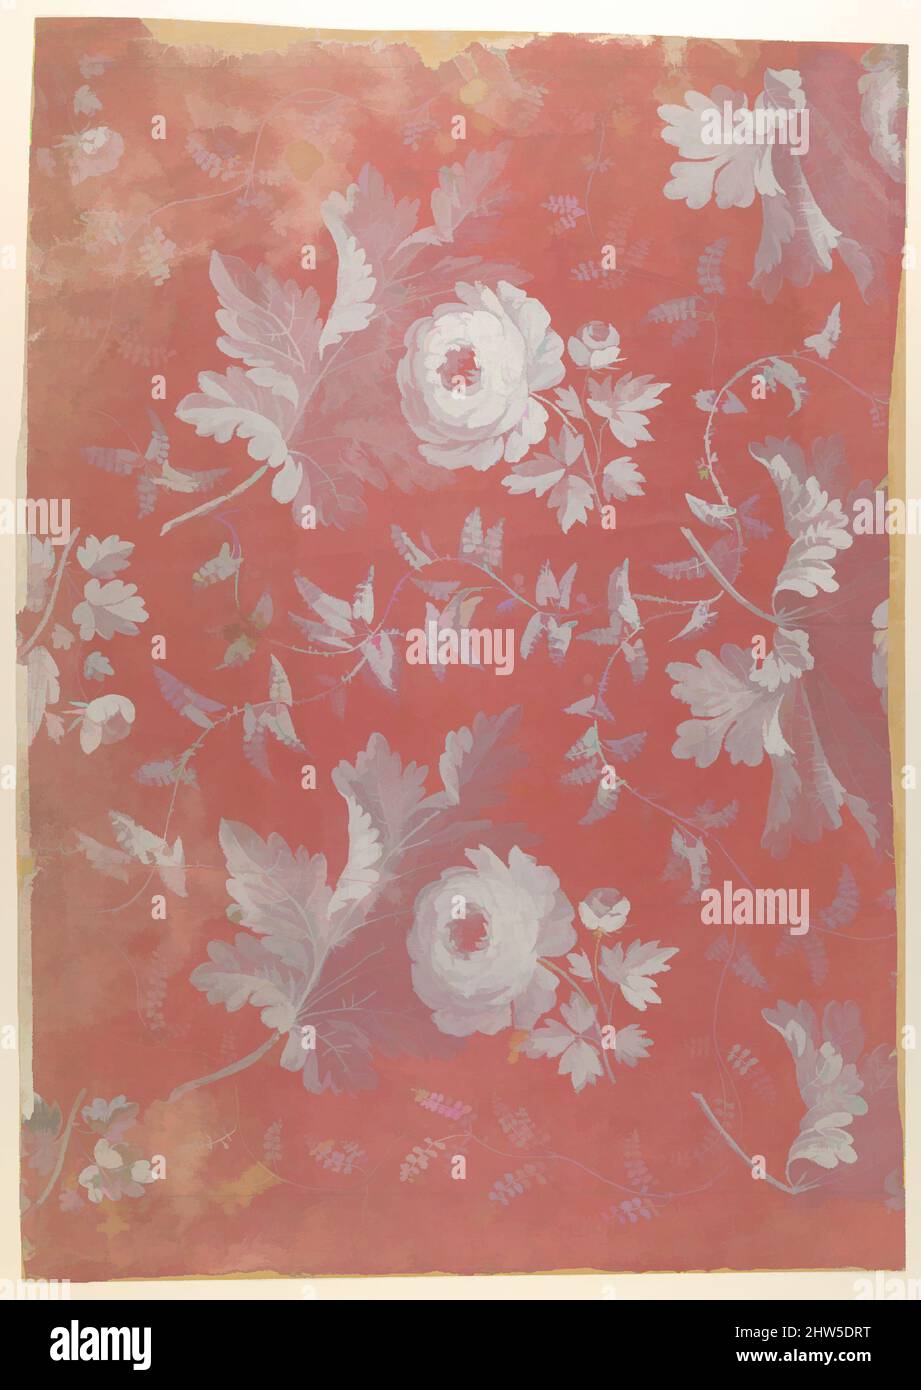 Art inspired by Design for Patterned Silk, ca. 1780–1825, Watercolor and gouache on pink paper, 16 3/8 x 23 9/16 in. (41.6 x 59.8 cm), Attributed to Jean François Bony (French, Givors 1760–1825 Paris, Classic works modernized by Artotop with a splash of modernity. Shapes, color and value, eye-catching visual impact on art. Emotions through freedom of artworks in a contemporary way. A timeless message pursuing a wildly creative new direction. Artists turning to the digital medium and creating the Artotop NFT Stock Photo